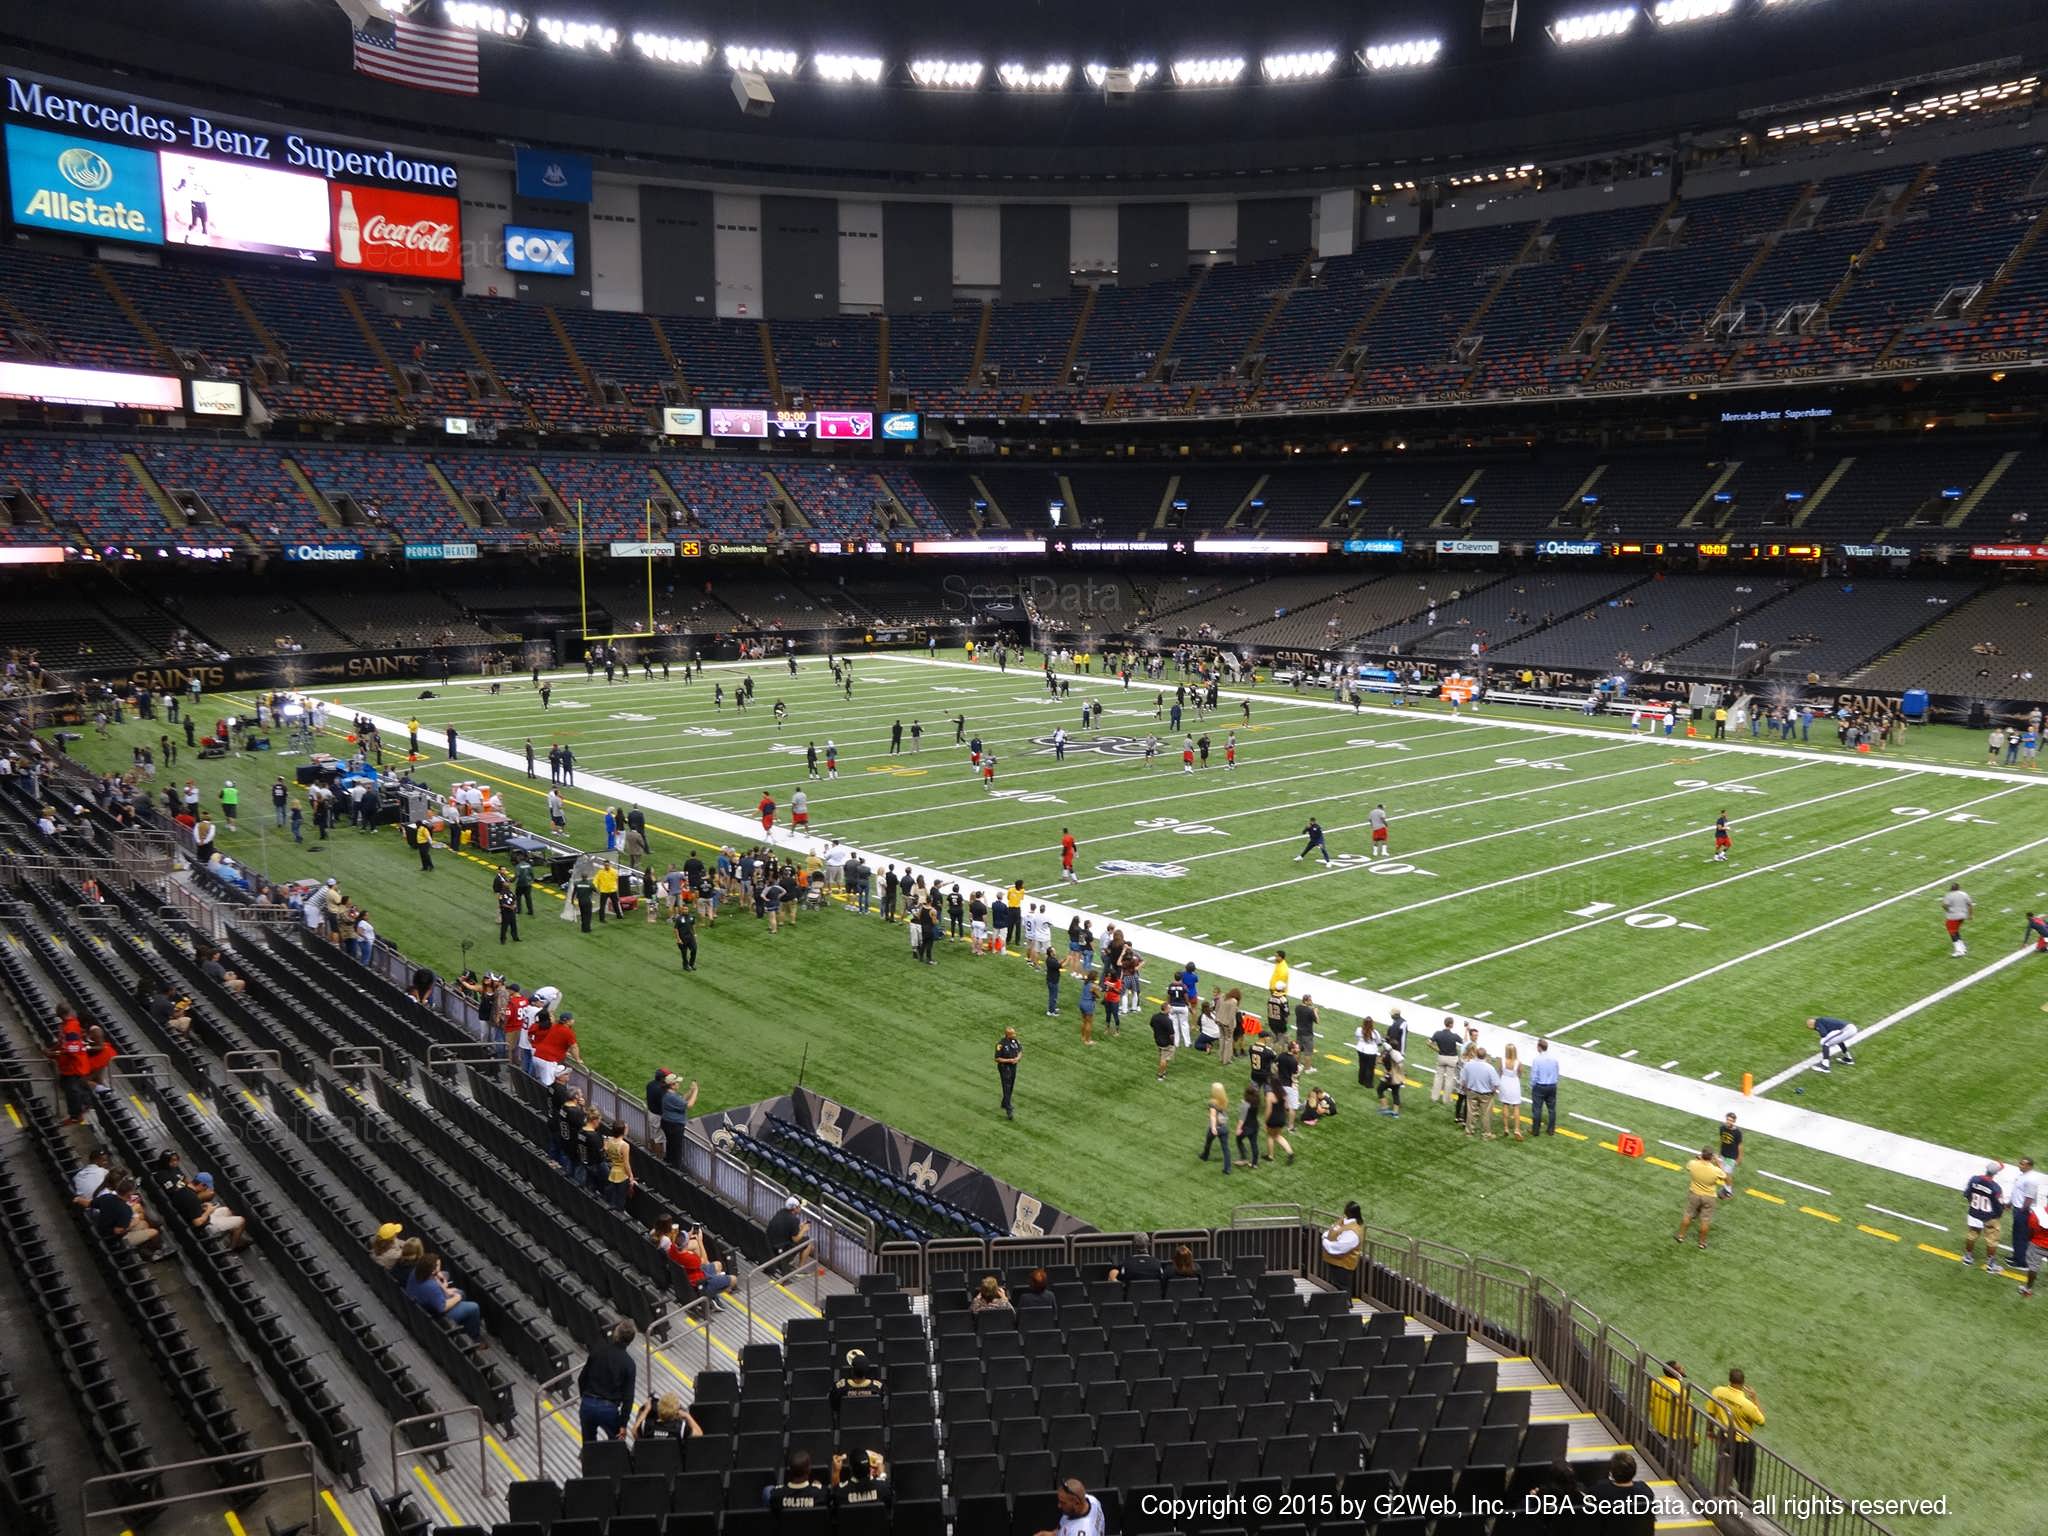 Seat view from section 211 at the Mercedes-Benz Superdome, home of the New Orleans Saints